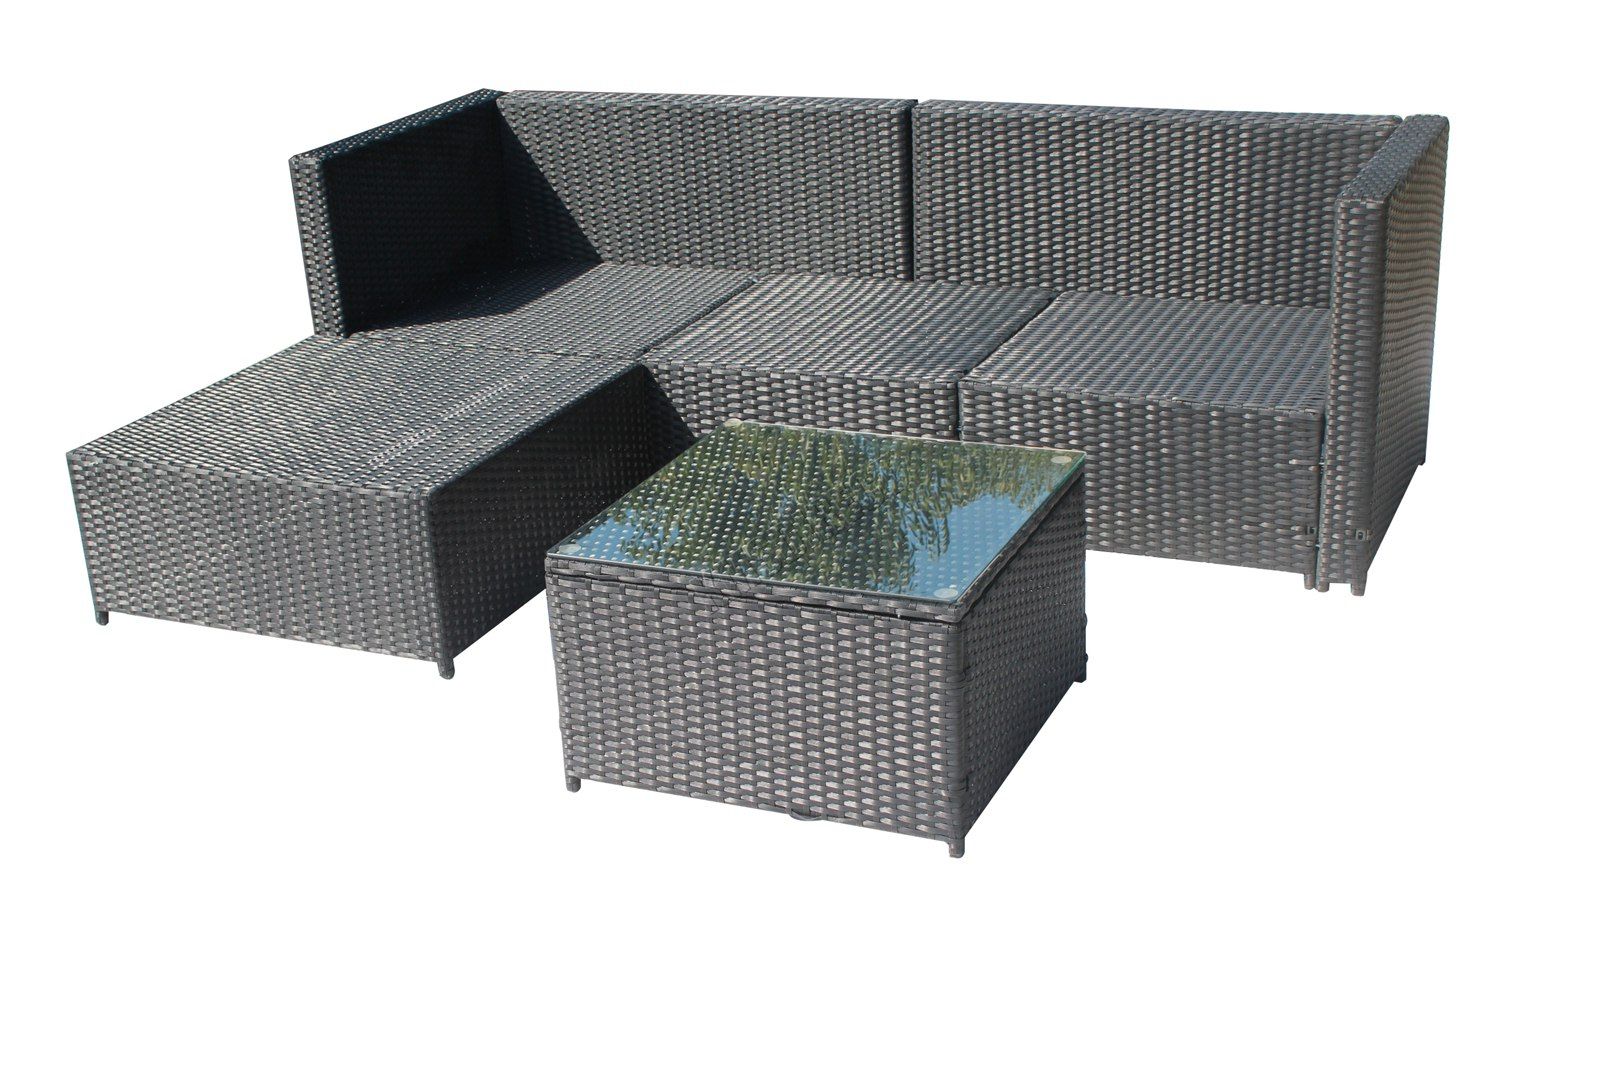 Spare Repair Rattan Garden Furniture Set Corner Sofa Glass Within Black And Tan Rattan Console Tables (View 8 of 20)